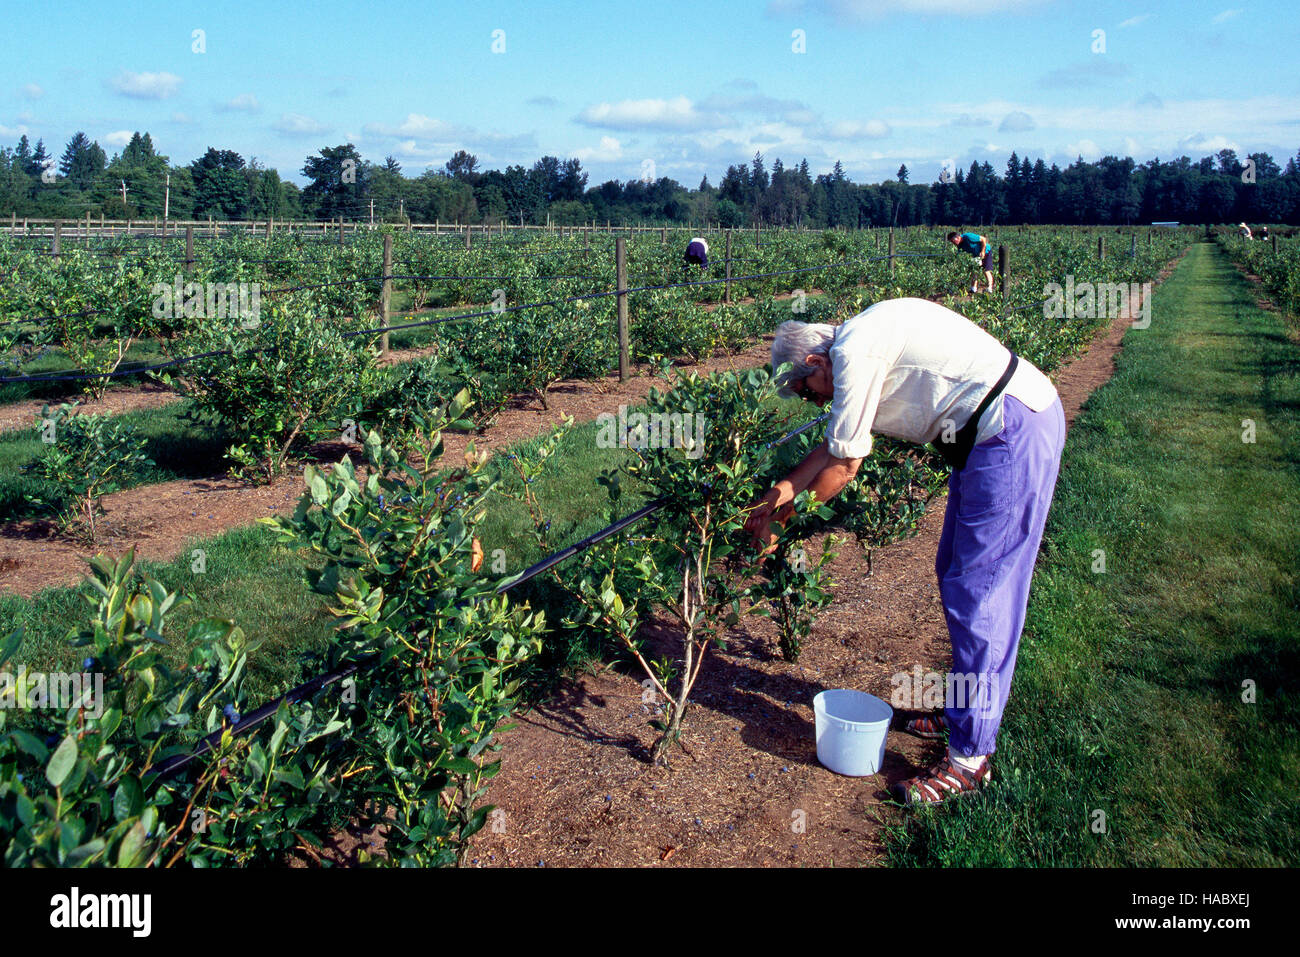 Middle-aged Woman picking Blueberries at a U-Pick Blueberry Farm, Fraser Valley, BC, British Columbia, Canada Stock Photo